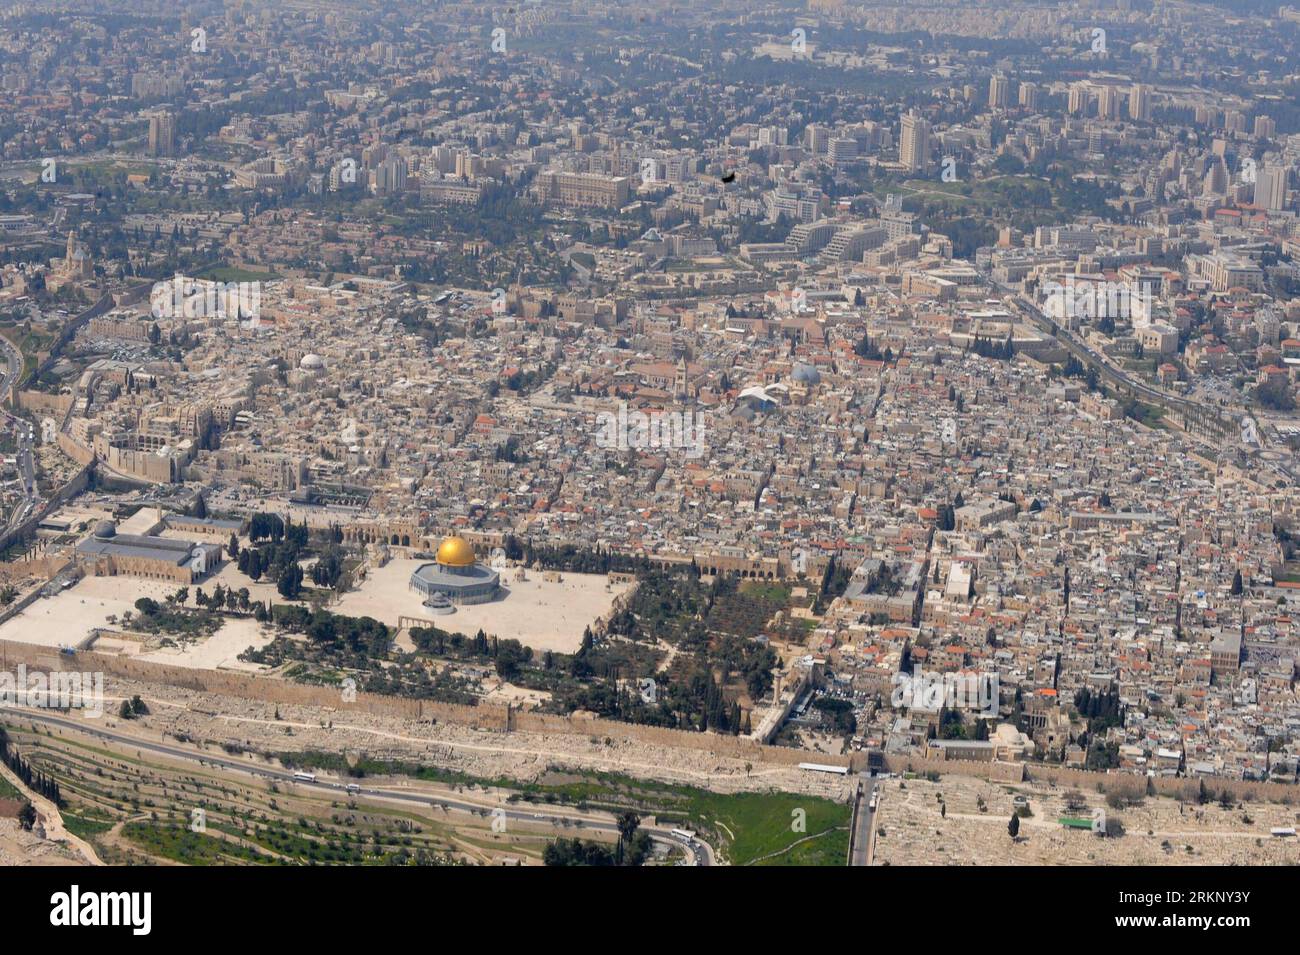 Bildnummer: 57690409  Datum: 27.03.2012  Copyright: imago/Xinhua (120326)-- JERUSALEM, March 26, 2012 (Xinhua) -- Photo taken on March 26, 2012 shows the bird s-eye view of the old city of Jerusalem. Jerusalem is located in the Judean Mountains between the Mediterranean Sea and the northern edge of the Dead Sea. It is a holy city to the three major religions -- Judaism, Christianity and Islam. Today, the status of Jerusalem remains on the core issues in the Israeli-Palestinian conflict. (Xinhua/Yin Dongxun) MIDEAST-JERUSALEM-AERIAL VIEW PUBLICATIONxNOTxINxCHN Gesellschaft Luftaufnahme Totale L Stock Photo